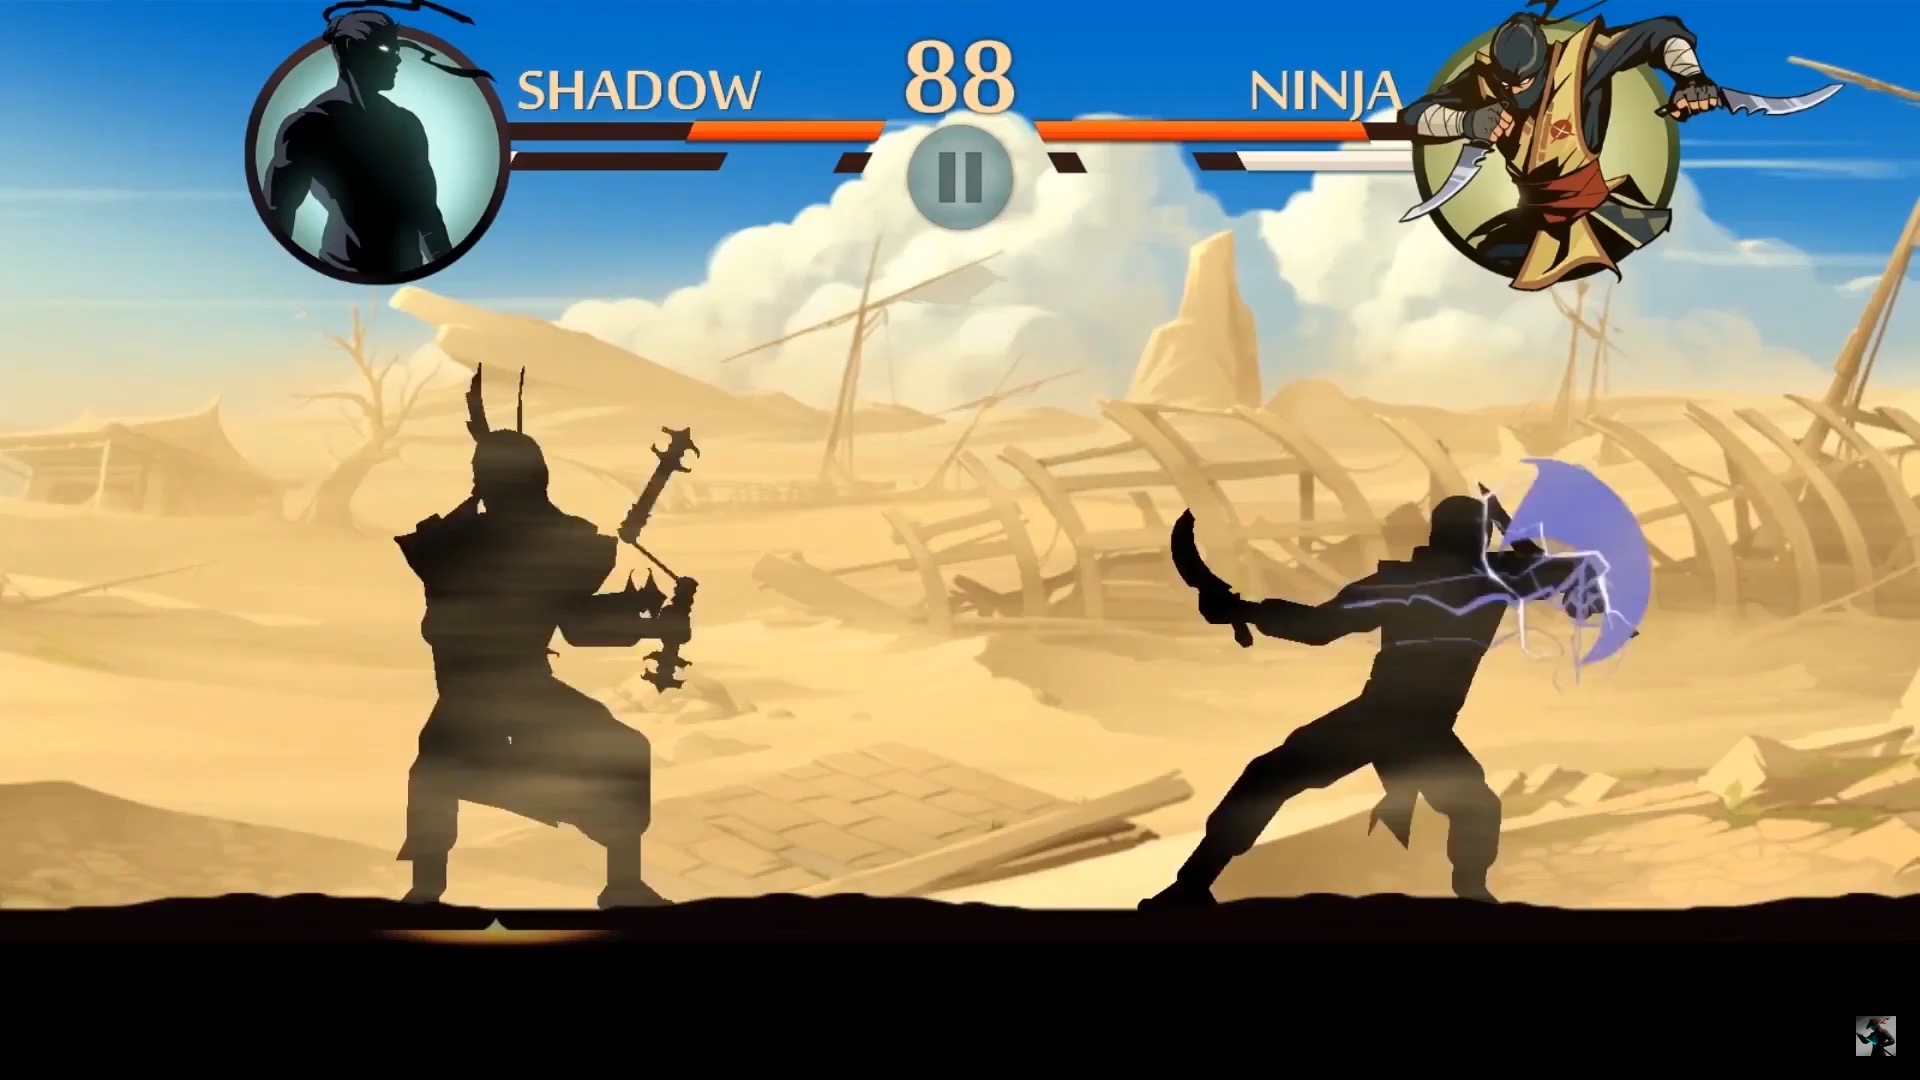 Shadow fight 2 файл. Shadow Fight 2 Shadow. Тень из игры Shadow Fight 2. Тень из Шедоу файт 2. Шадоу файт 2 Special Edition.